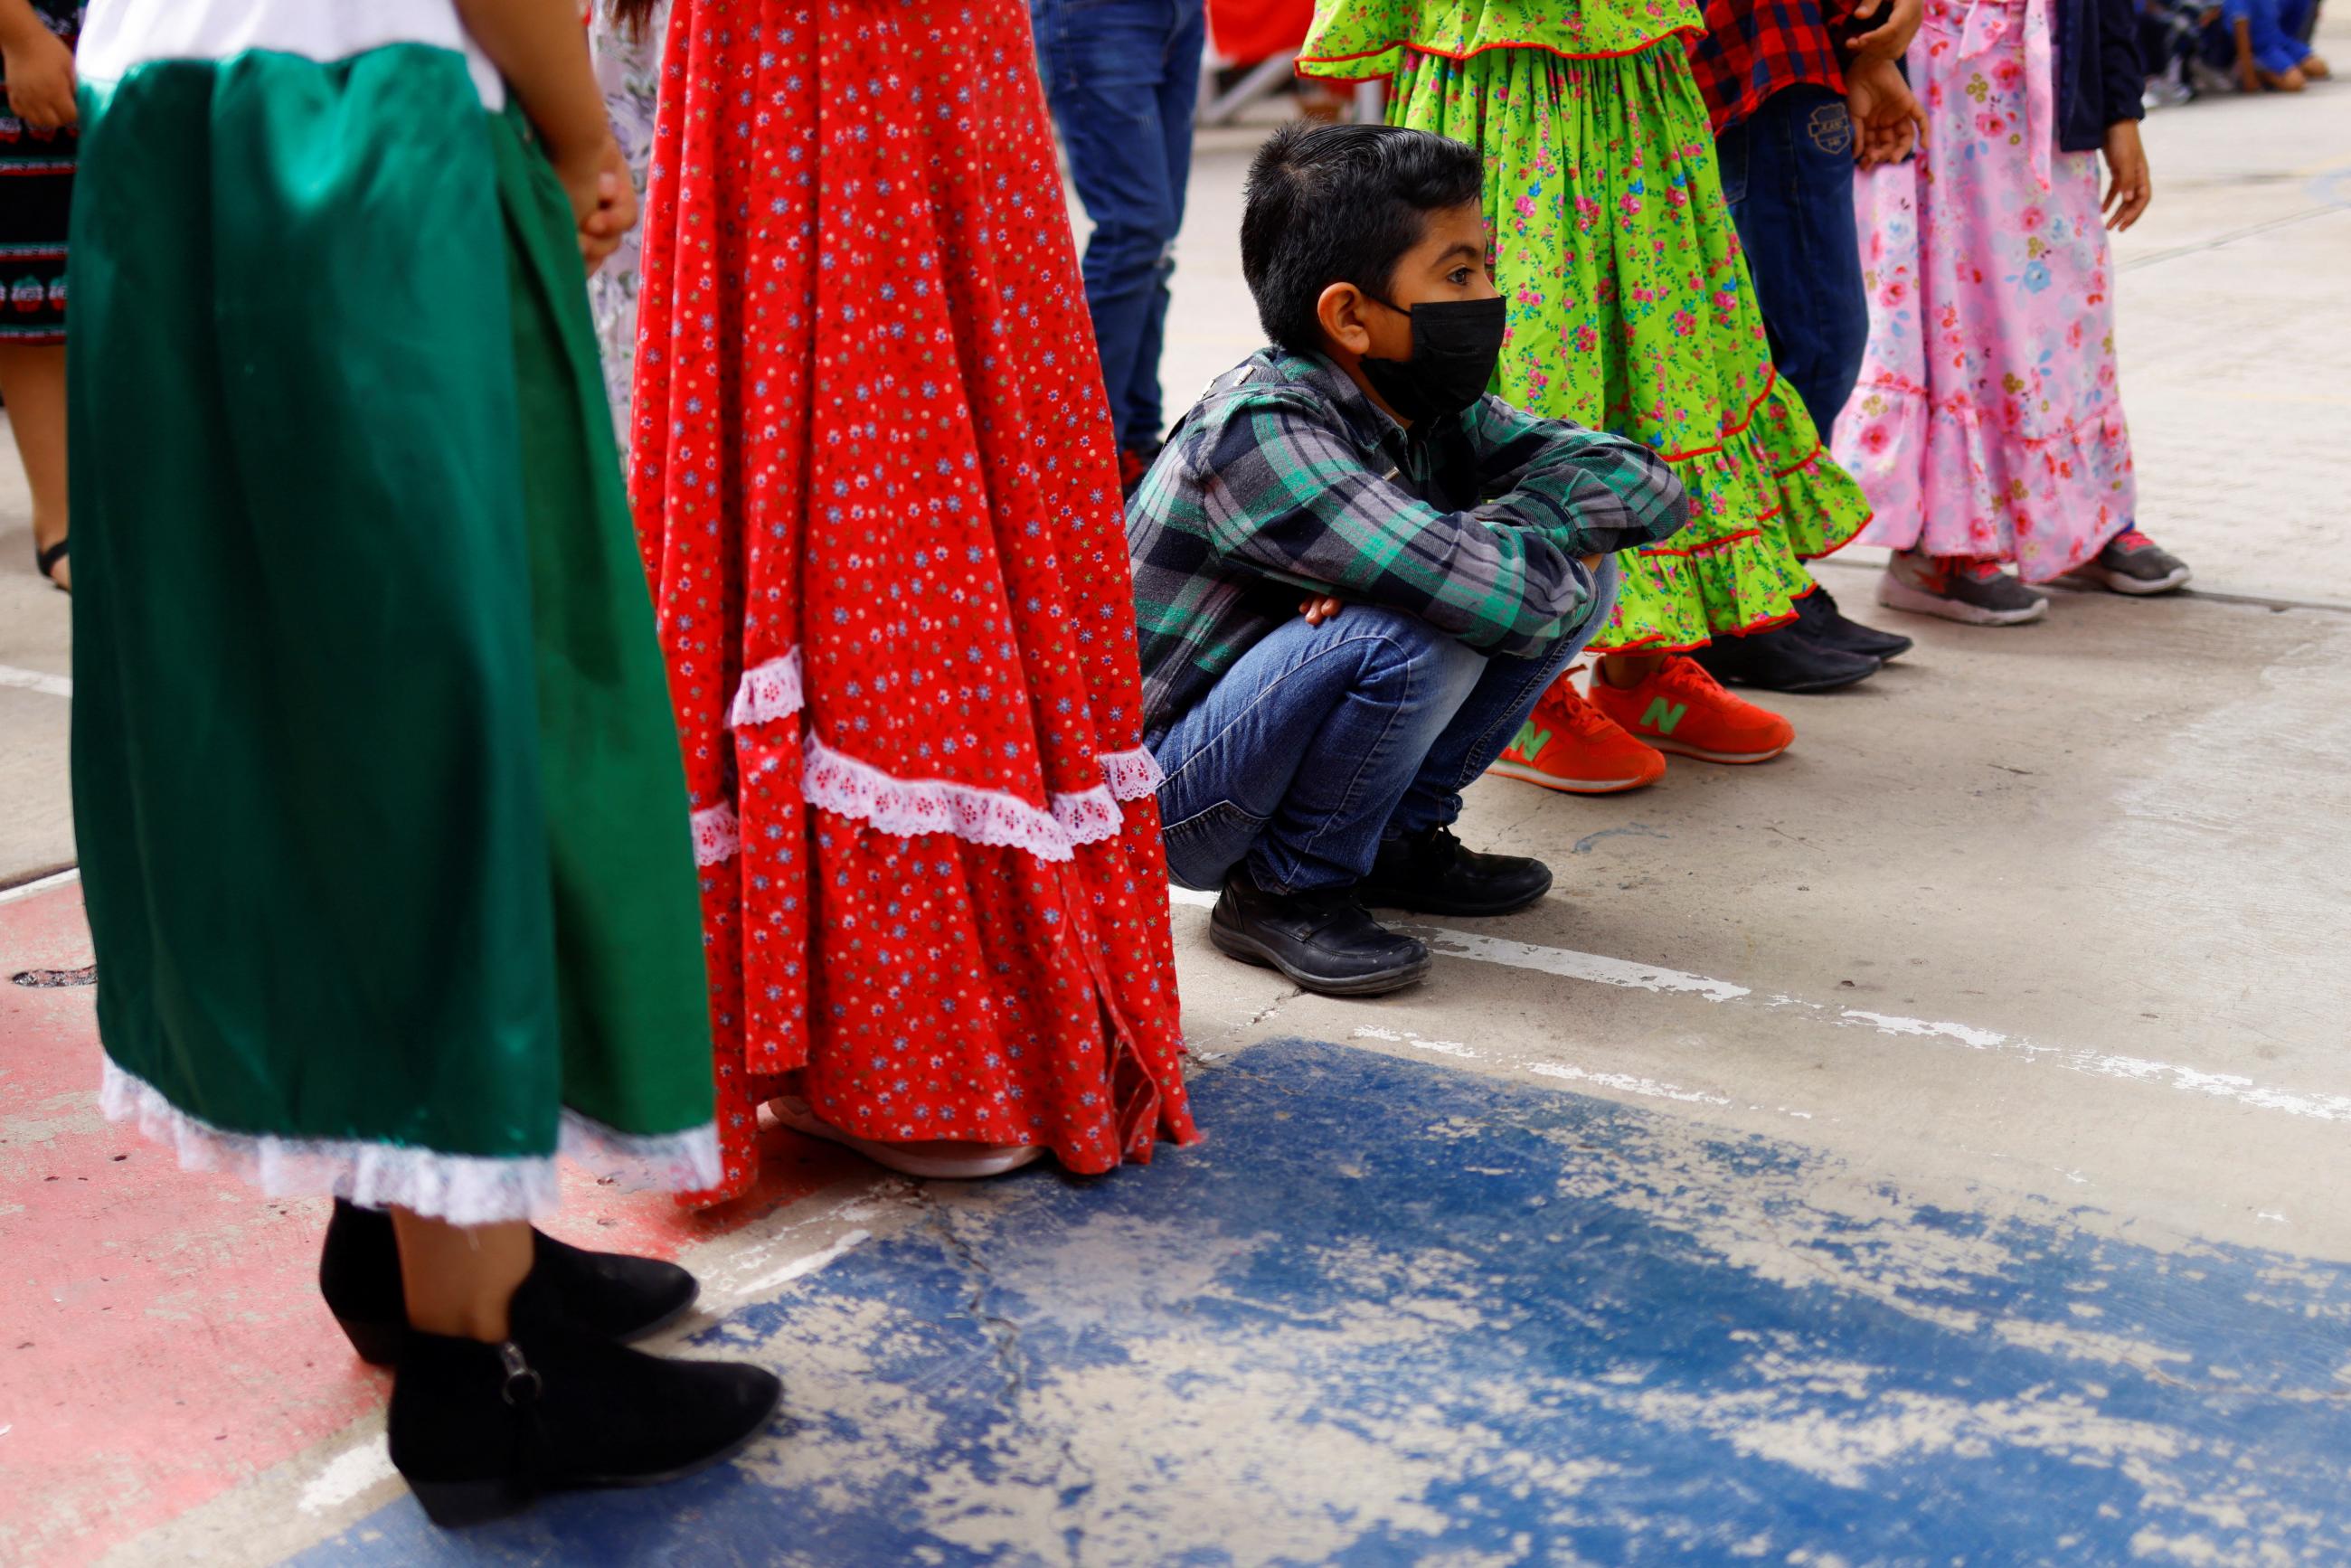 A student wearing a mask squats down to rest while attending an in-person class during a COVID-19 outbreak in Ciudad Juarez, Mexico, on June 21, 2022. Colorful skirts worn by girls nearby can be seen around him.